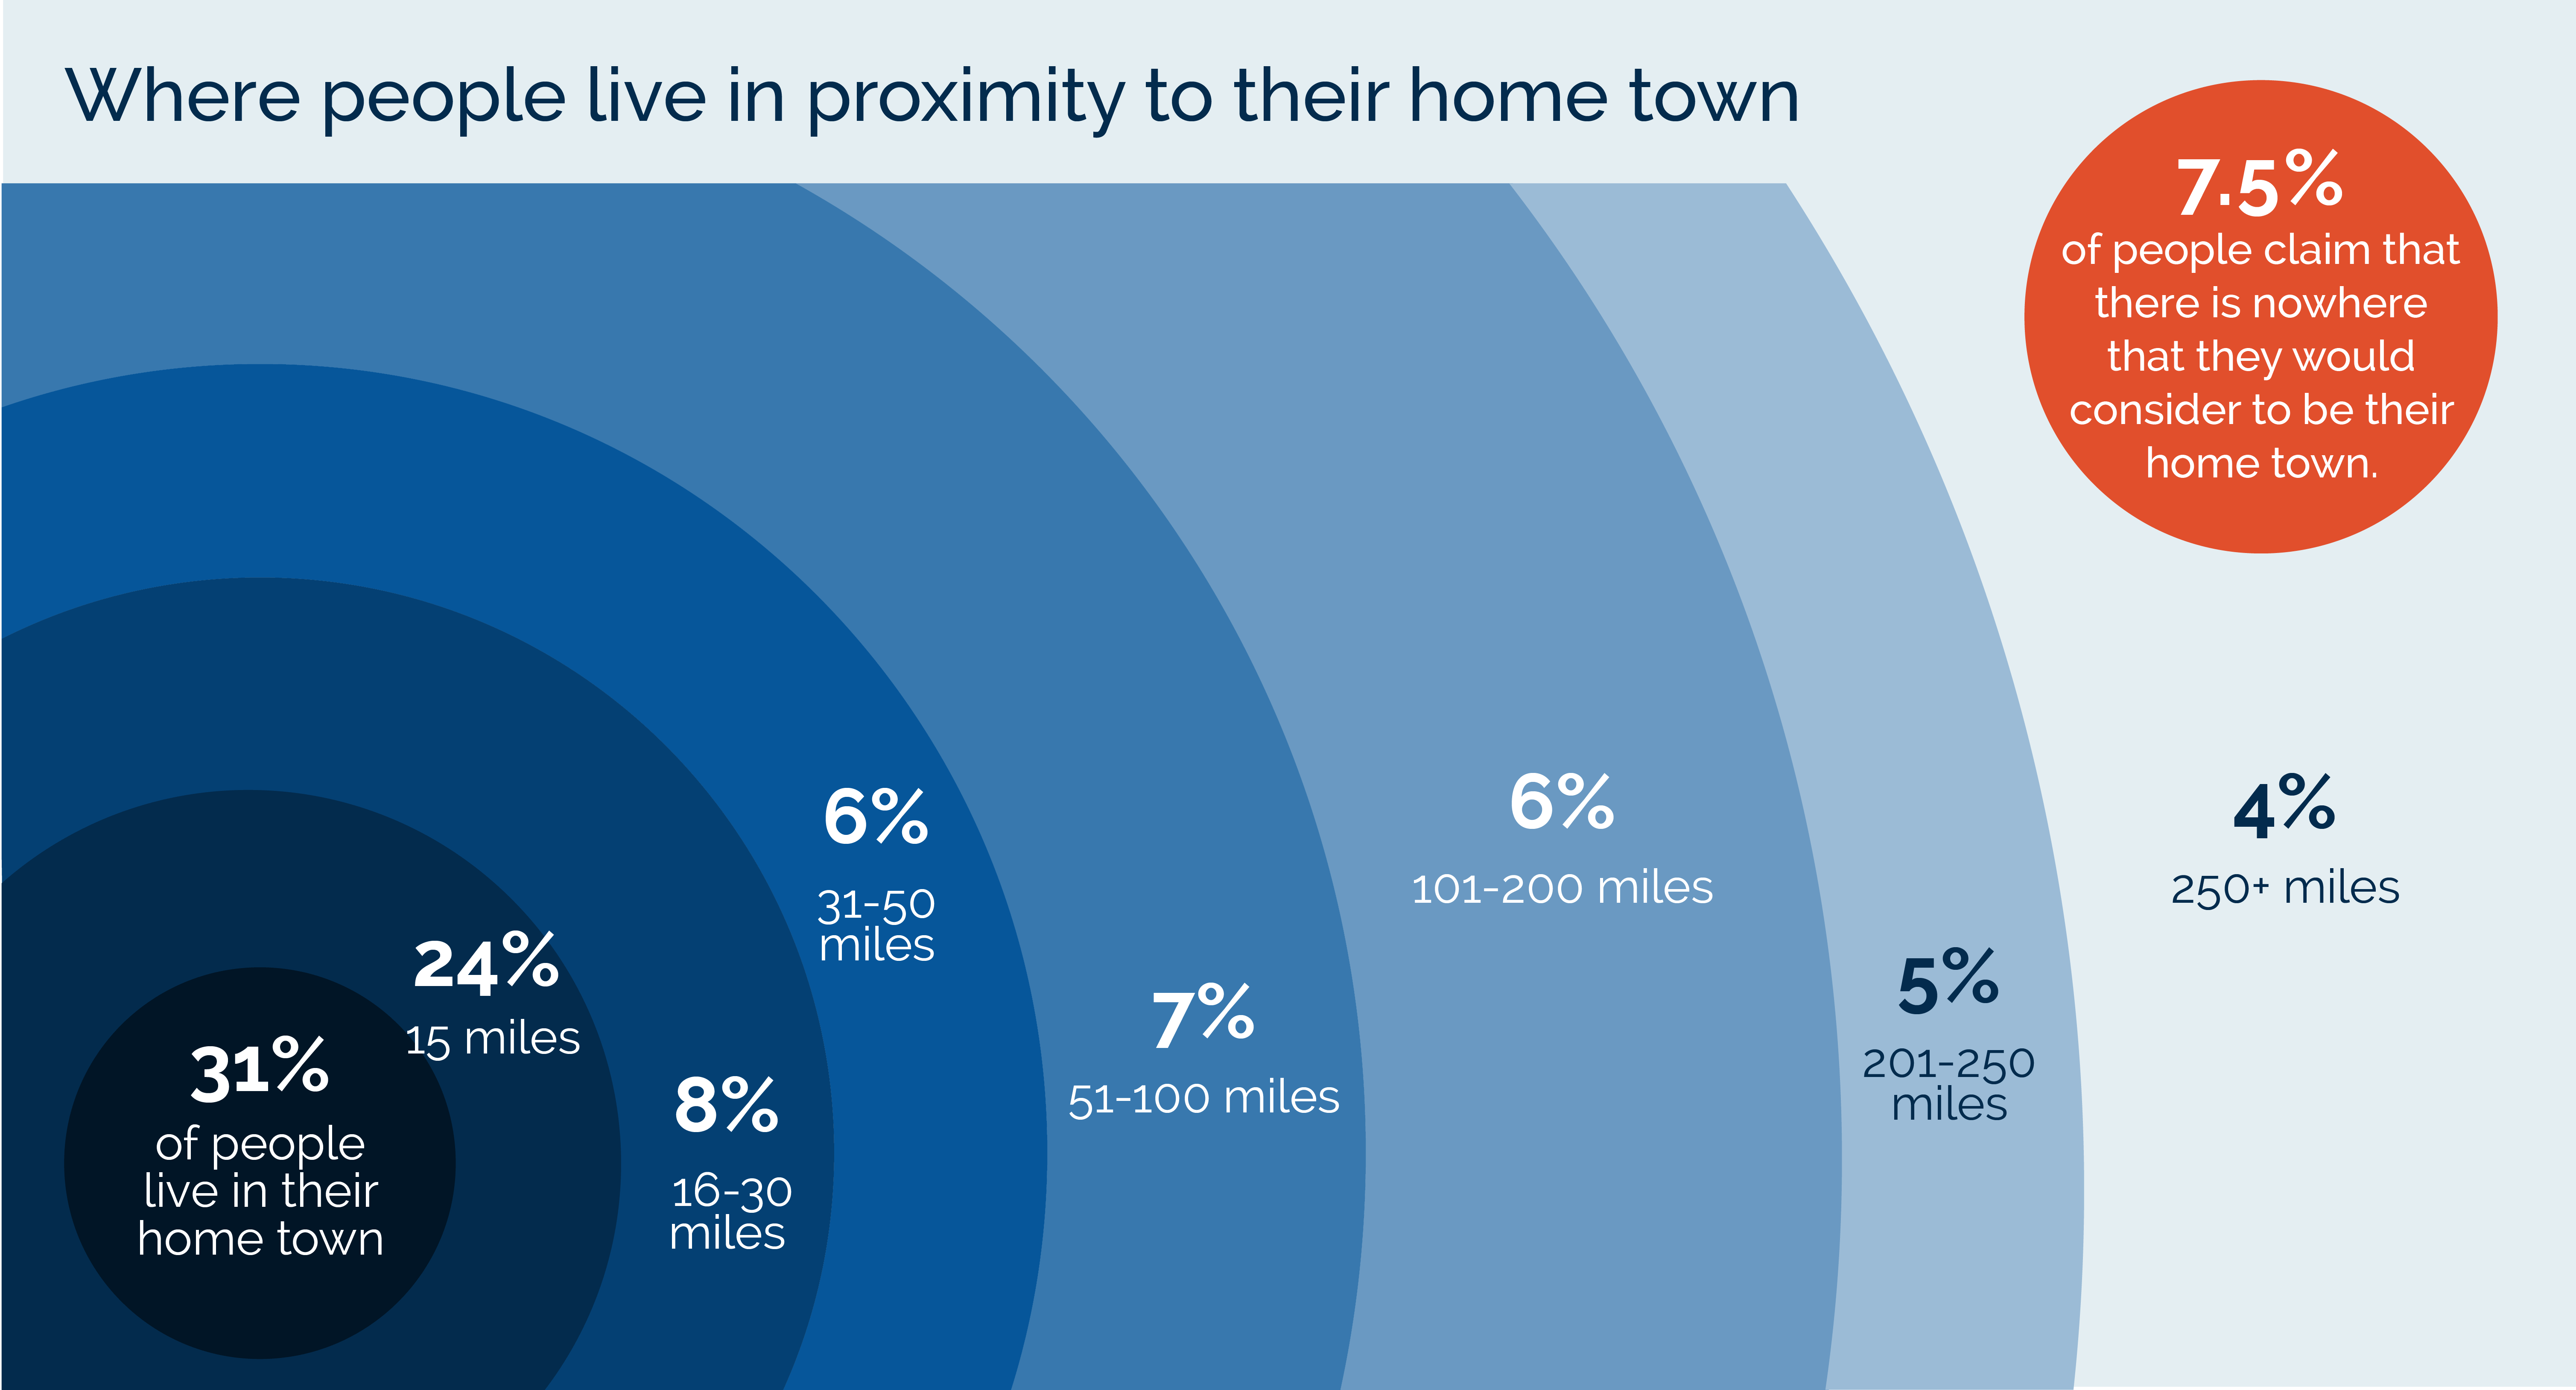 Where people live in proximity to their home town